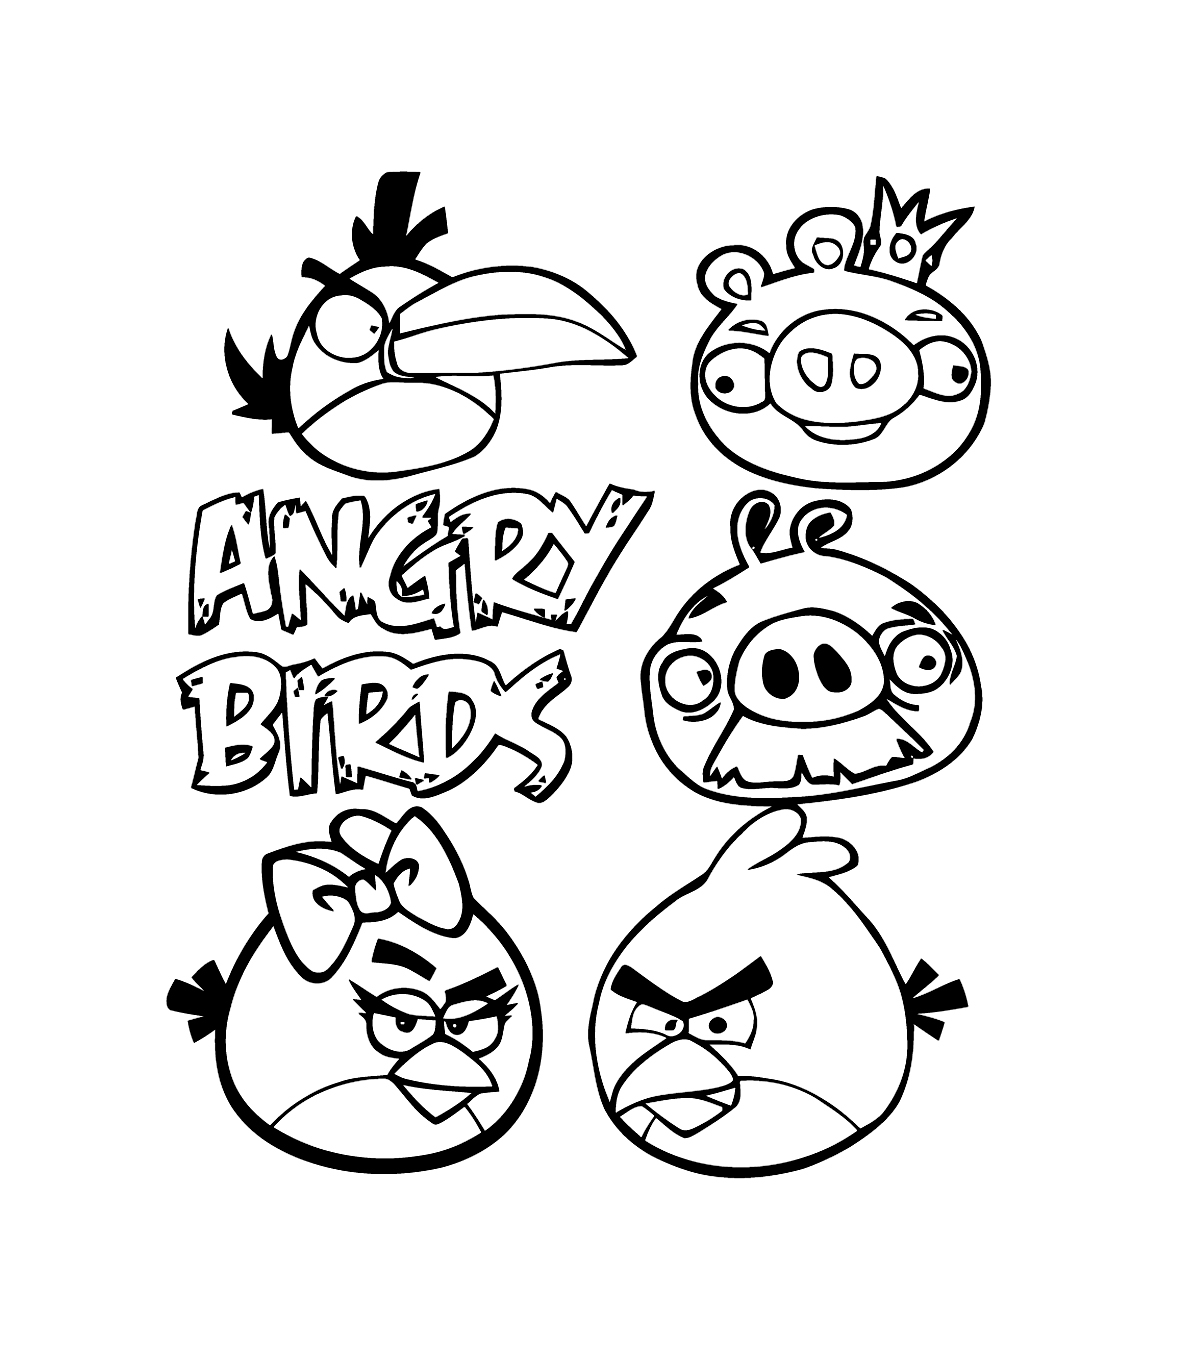 Image of Angry birds to print and color